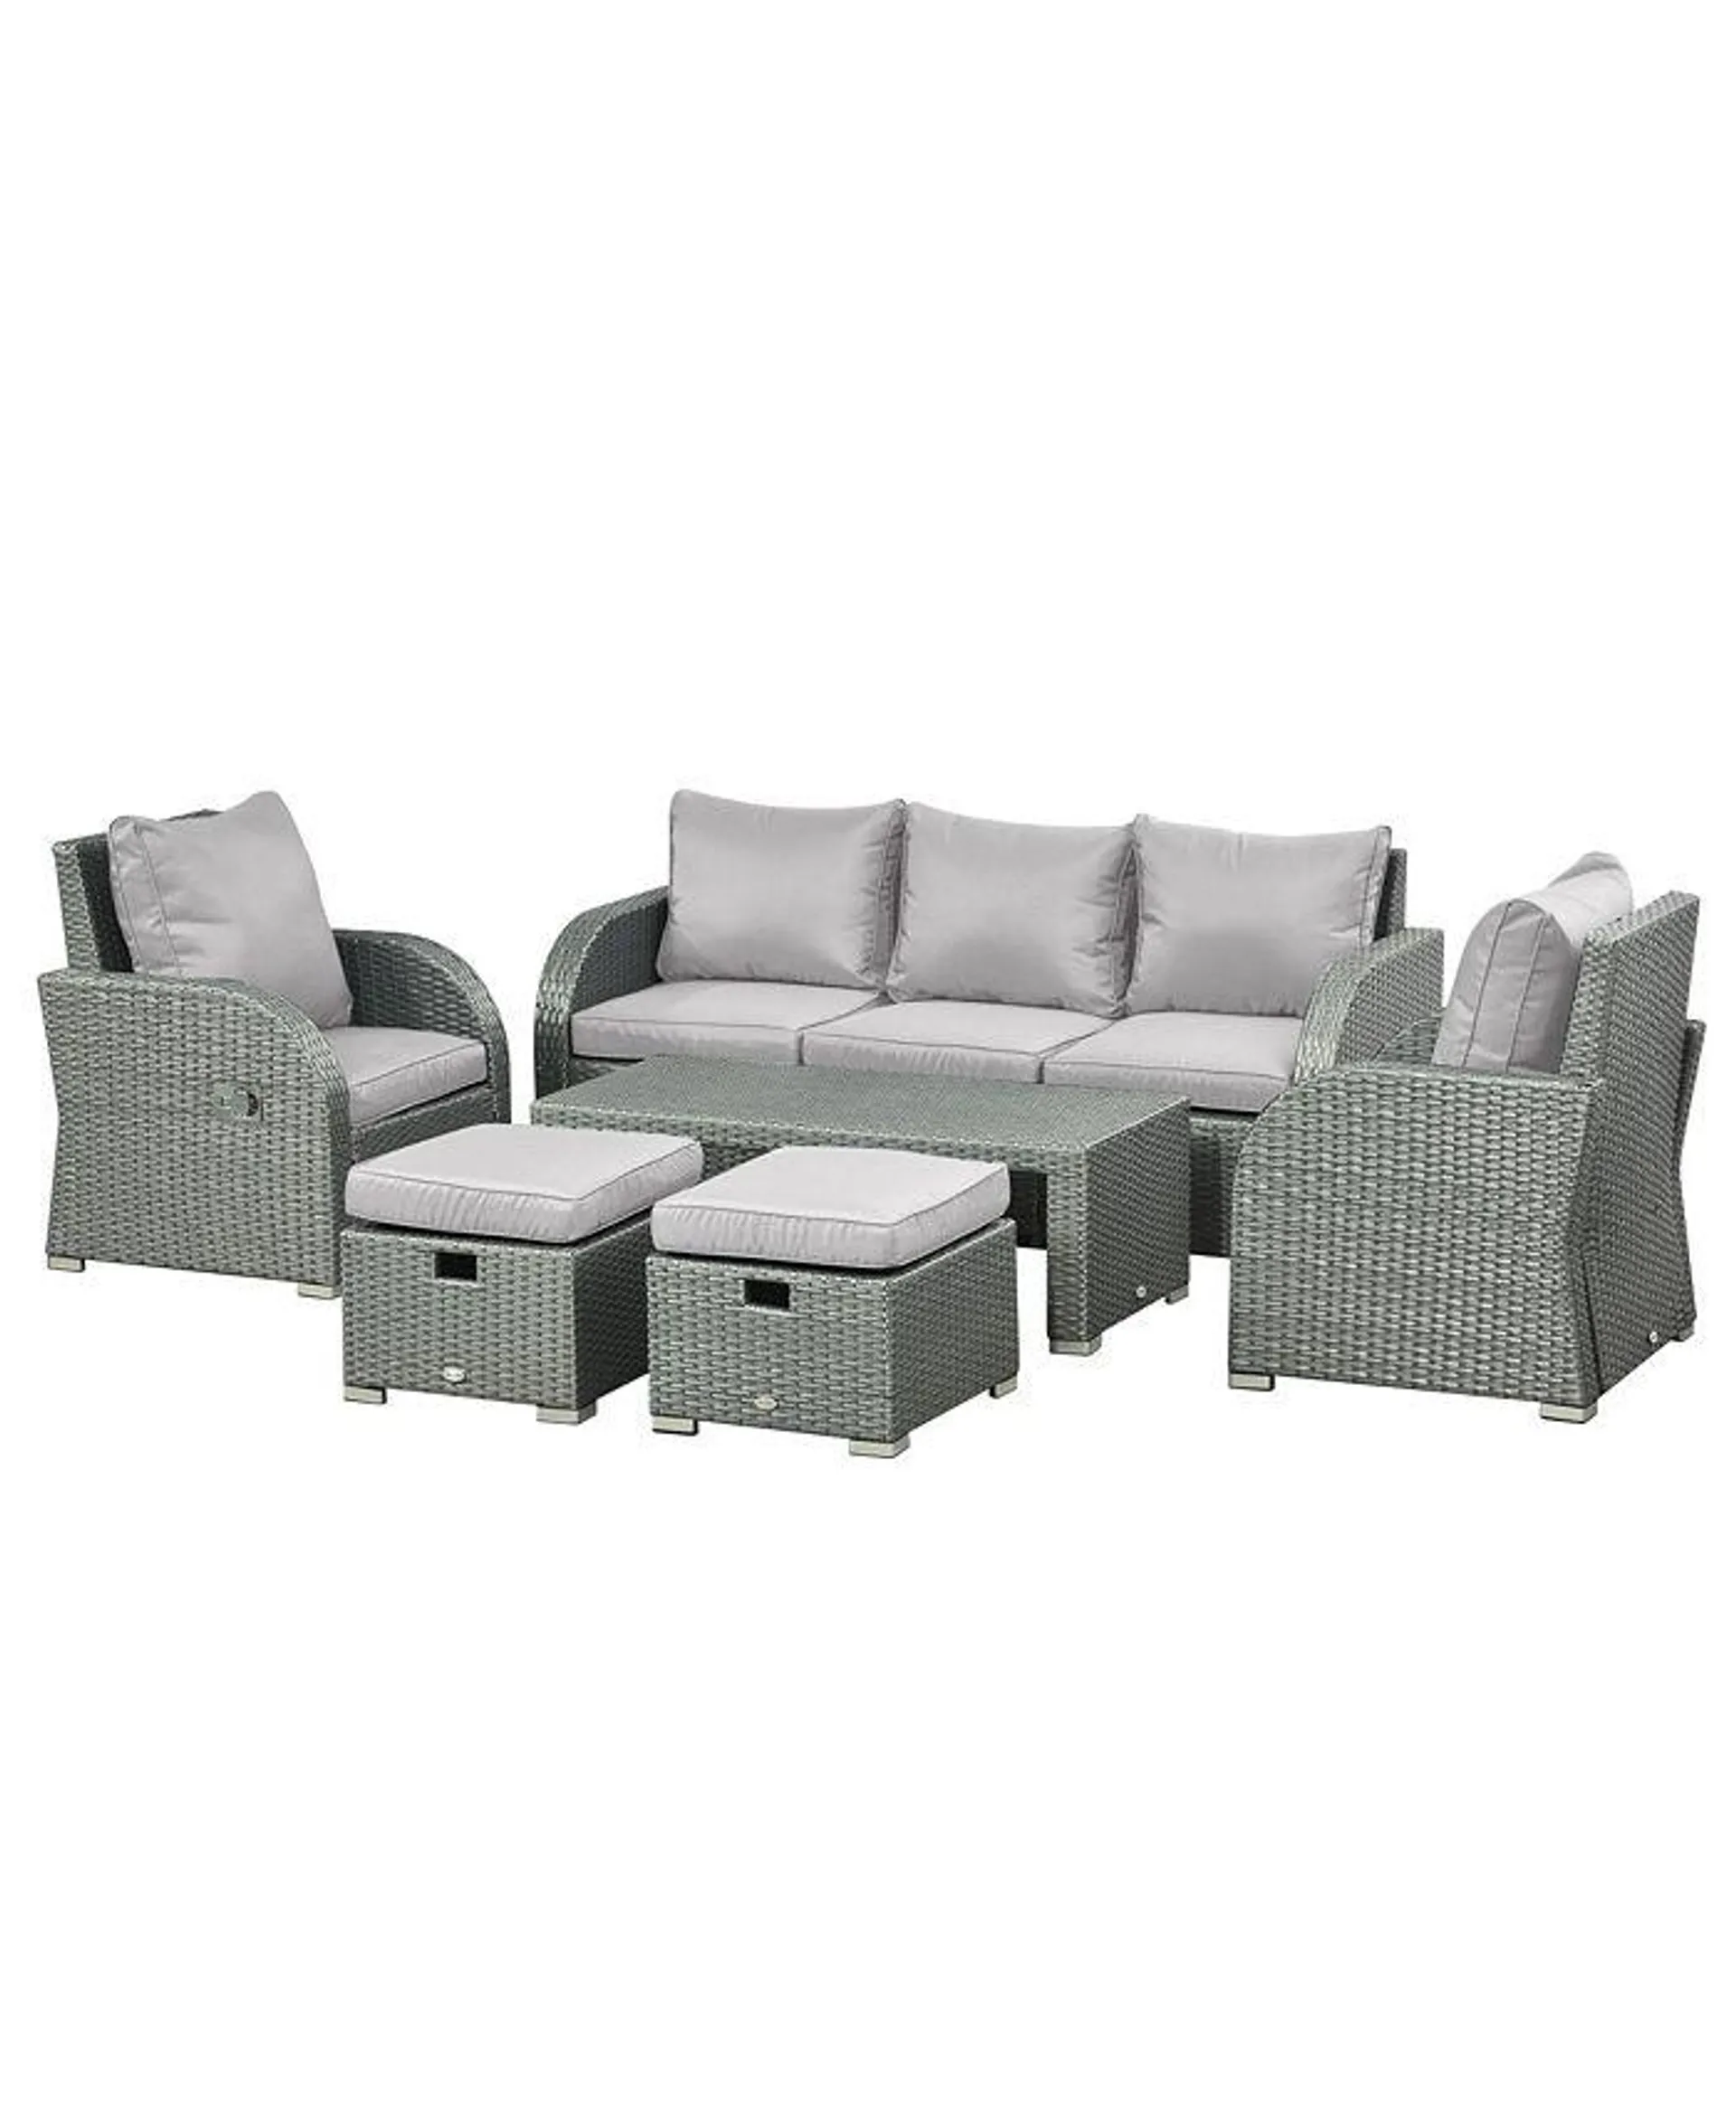 6-Piece Outdoor Rattan Patio Sectional Sofa Set with 3-Seat Couch, 2 Recliners, 2 Ottoman Footrests, & Coffee Table Conversation Set, Light Grey